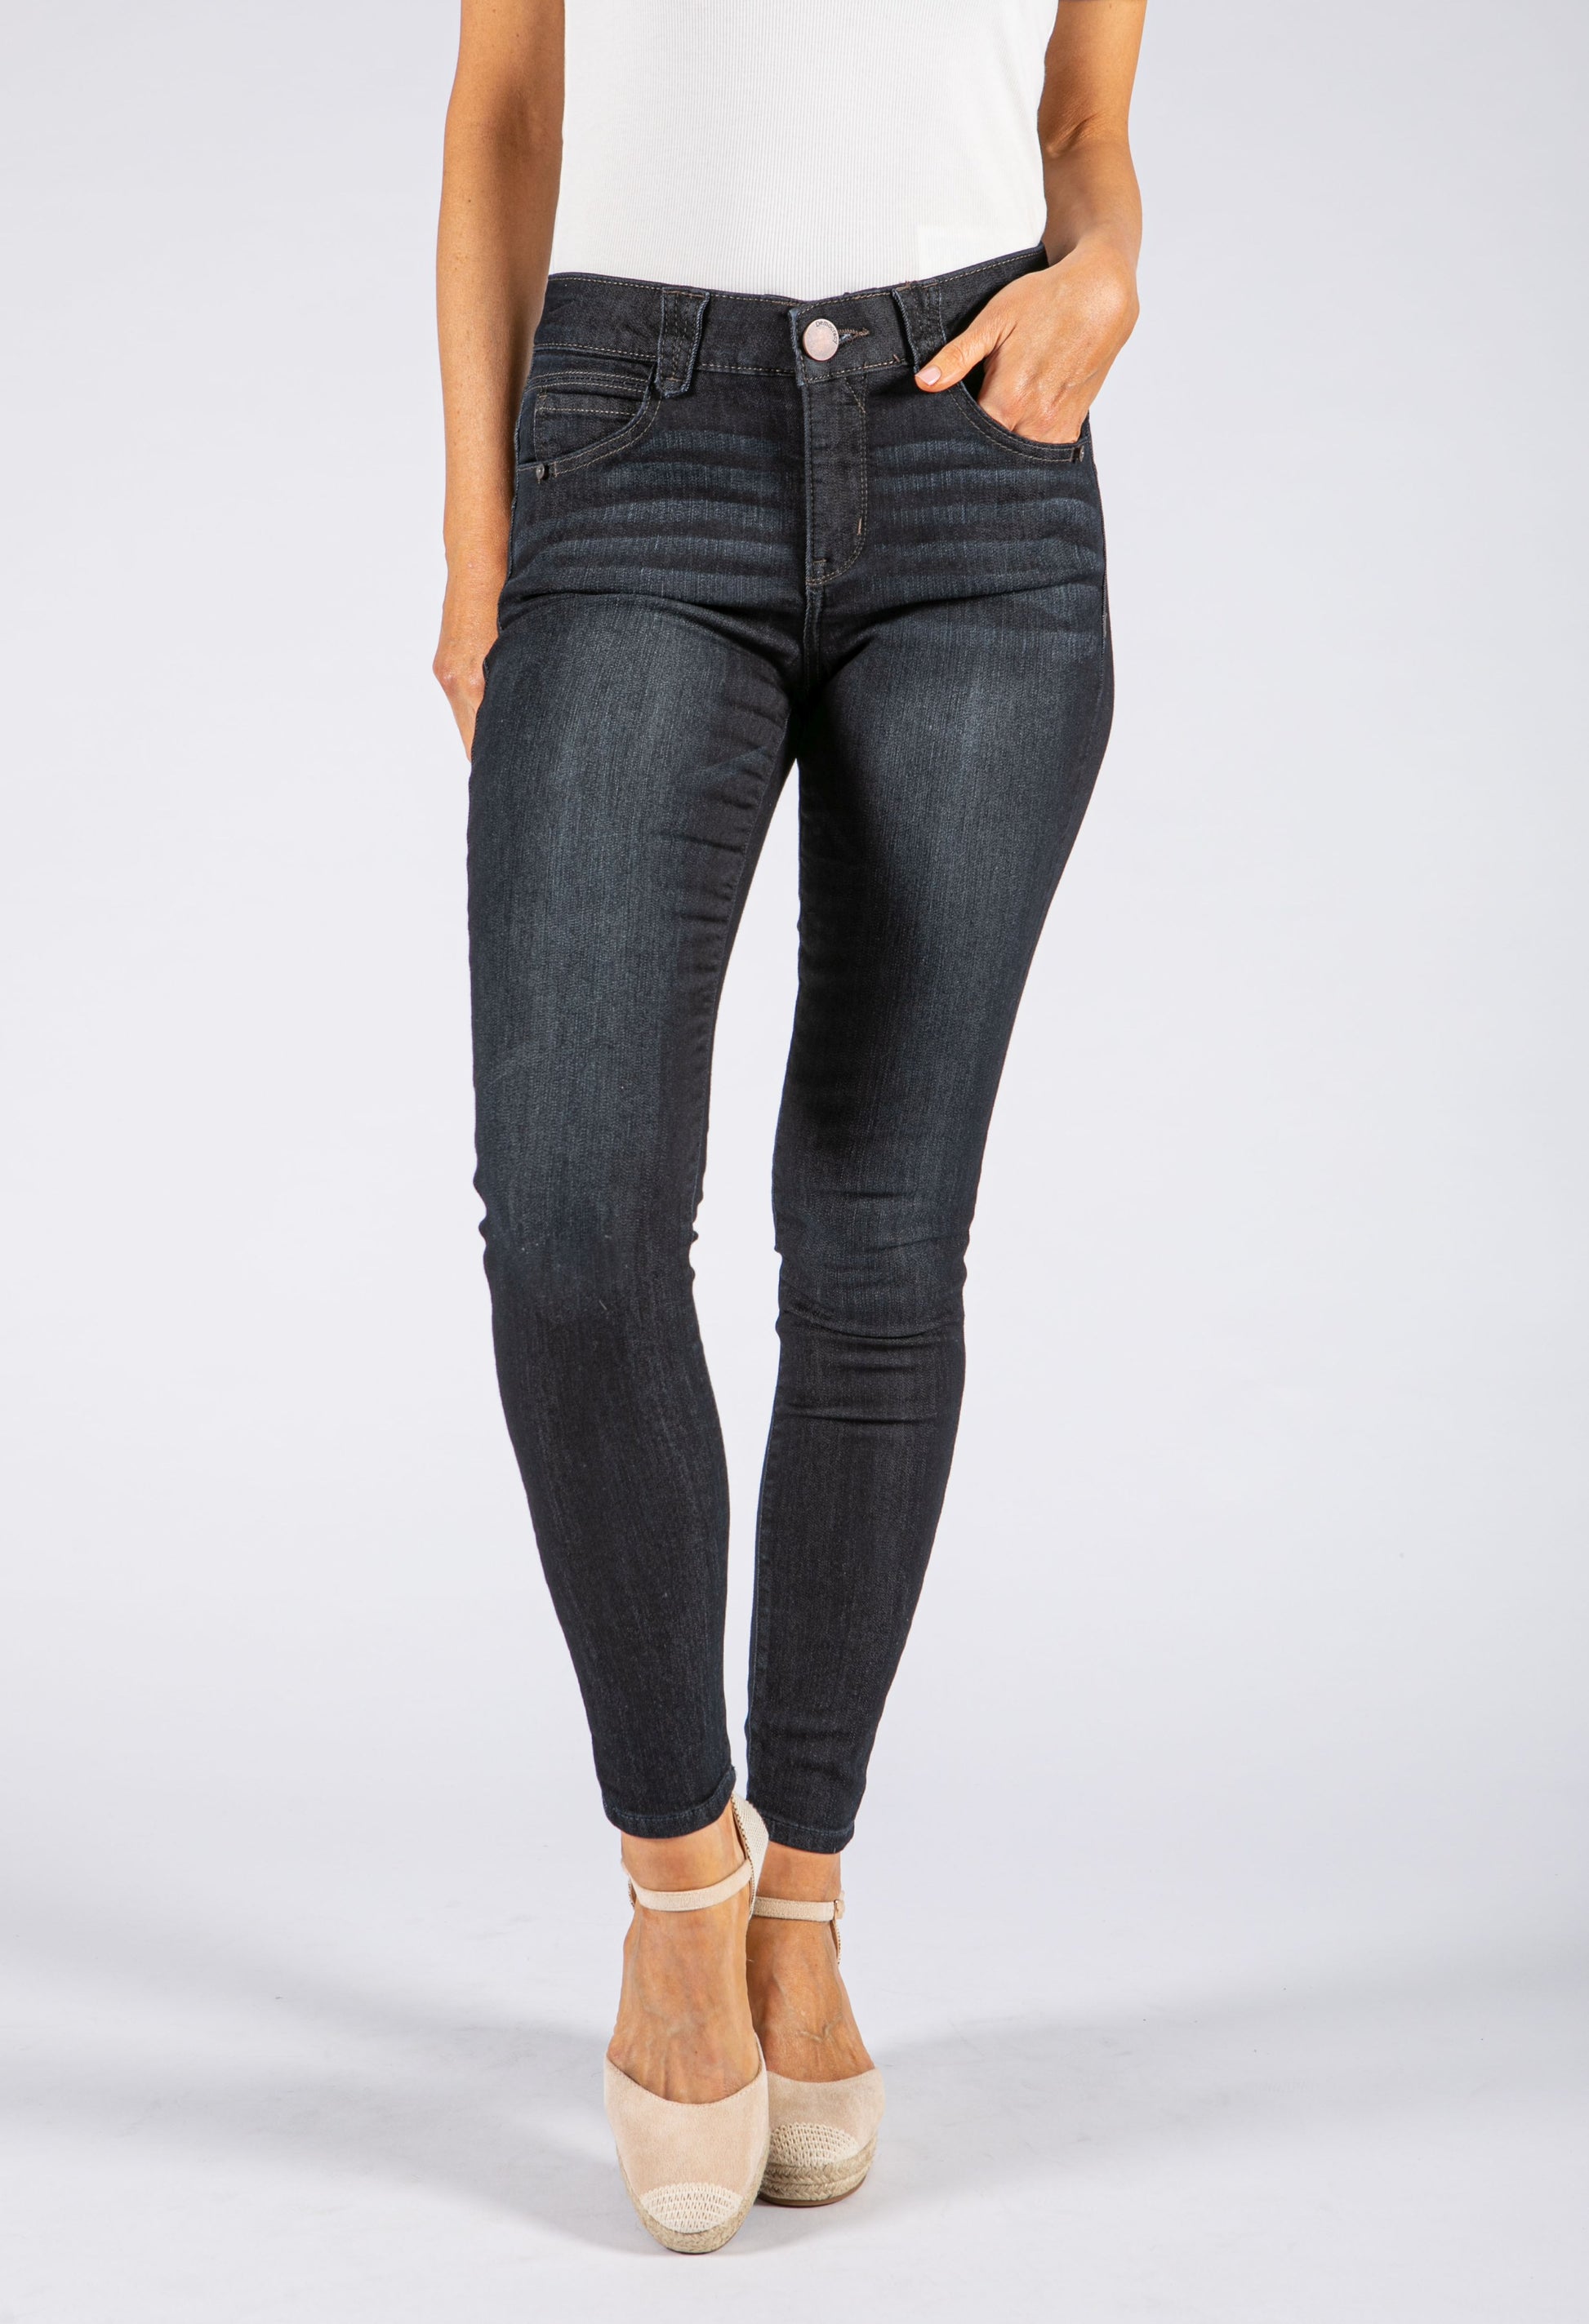 Democracy ''Ab''solution® Patriot Booty Lift Straight Leg Jean at